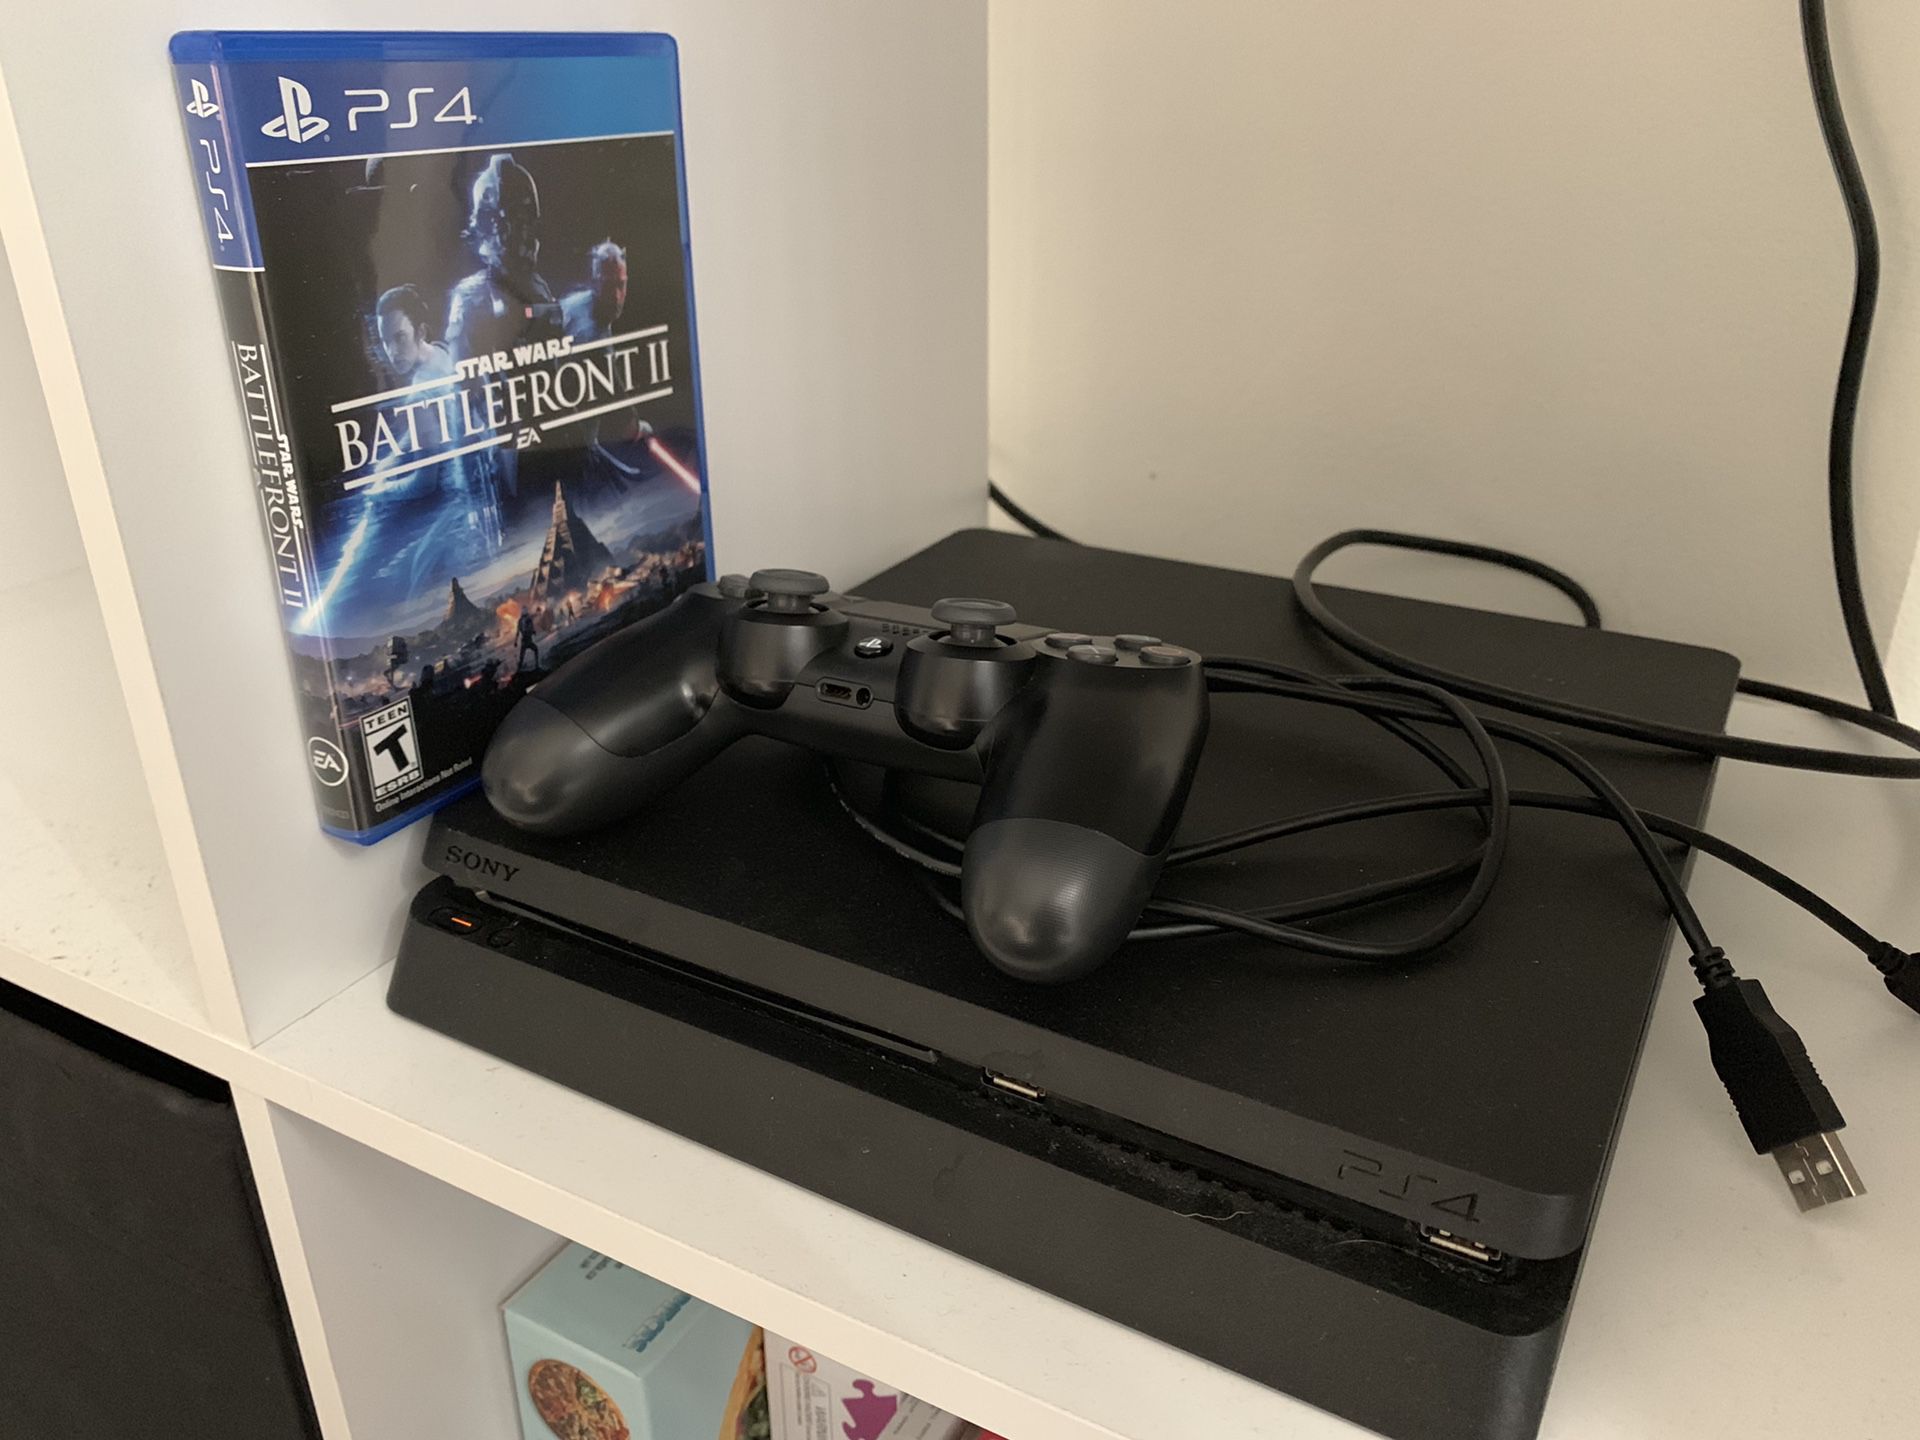 Playstation 4 Slim 500GB with Star Wars Battlefront 2 and controller included